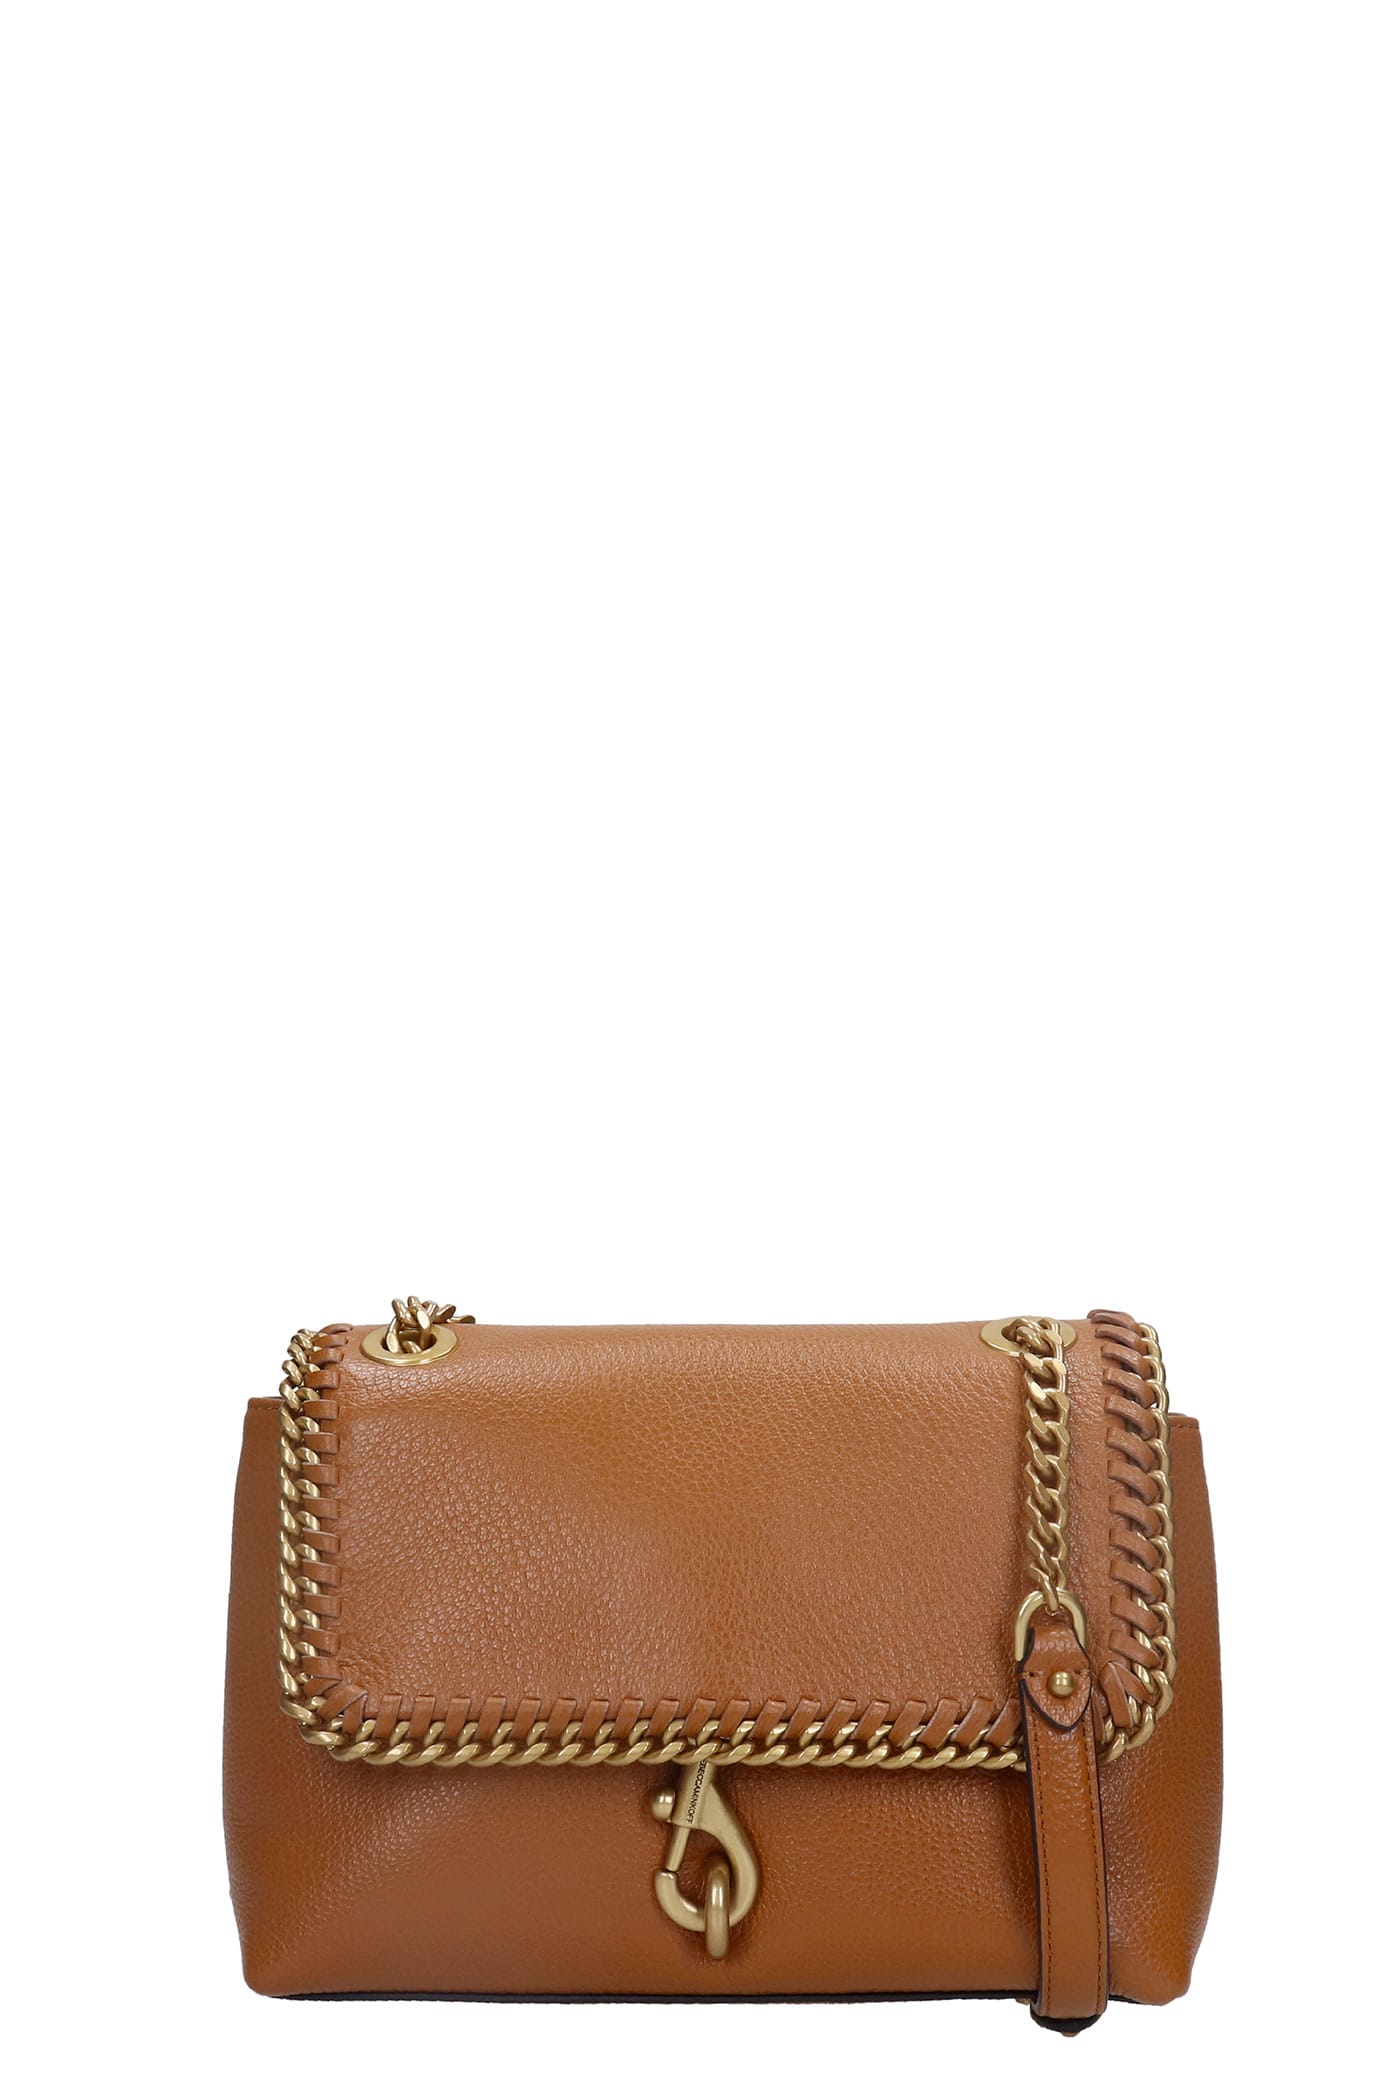 Rebecca Minkoff Edie X Body Shoulder Bag In Leather Color Leather